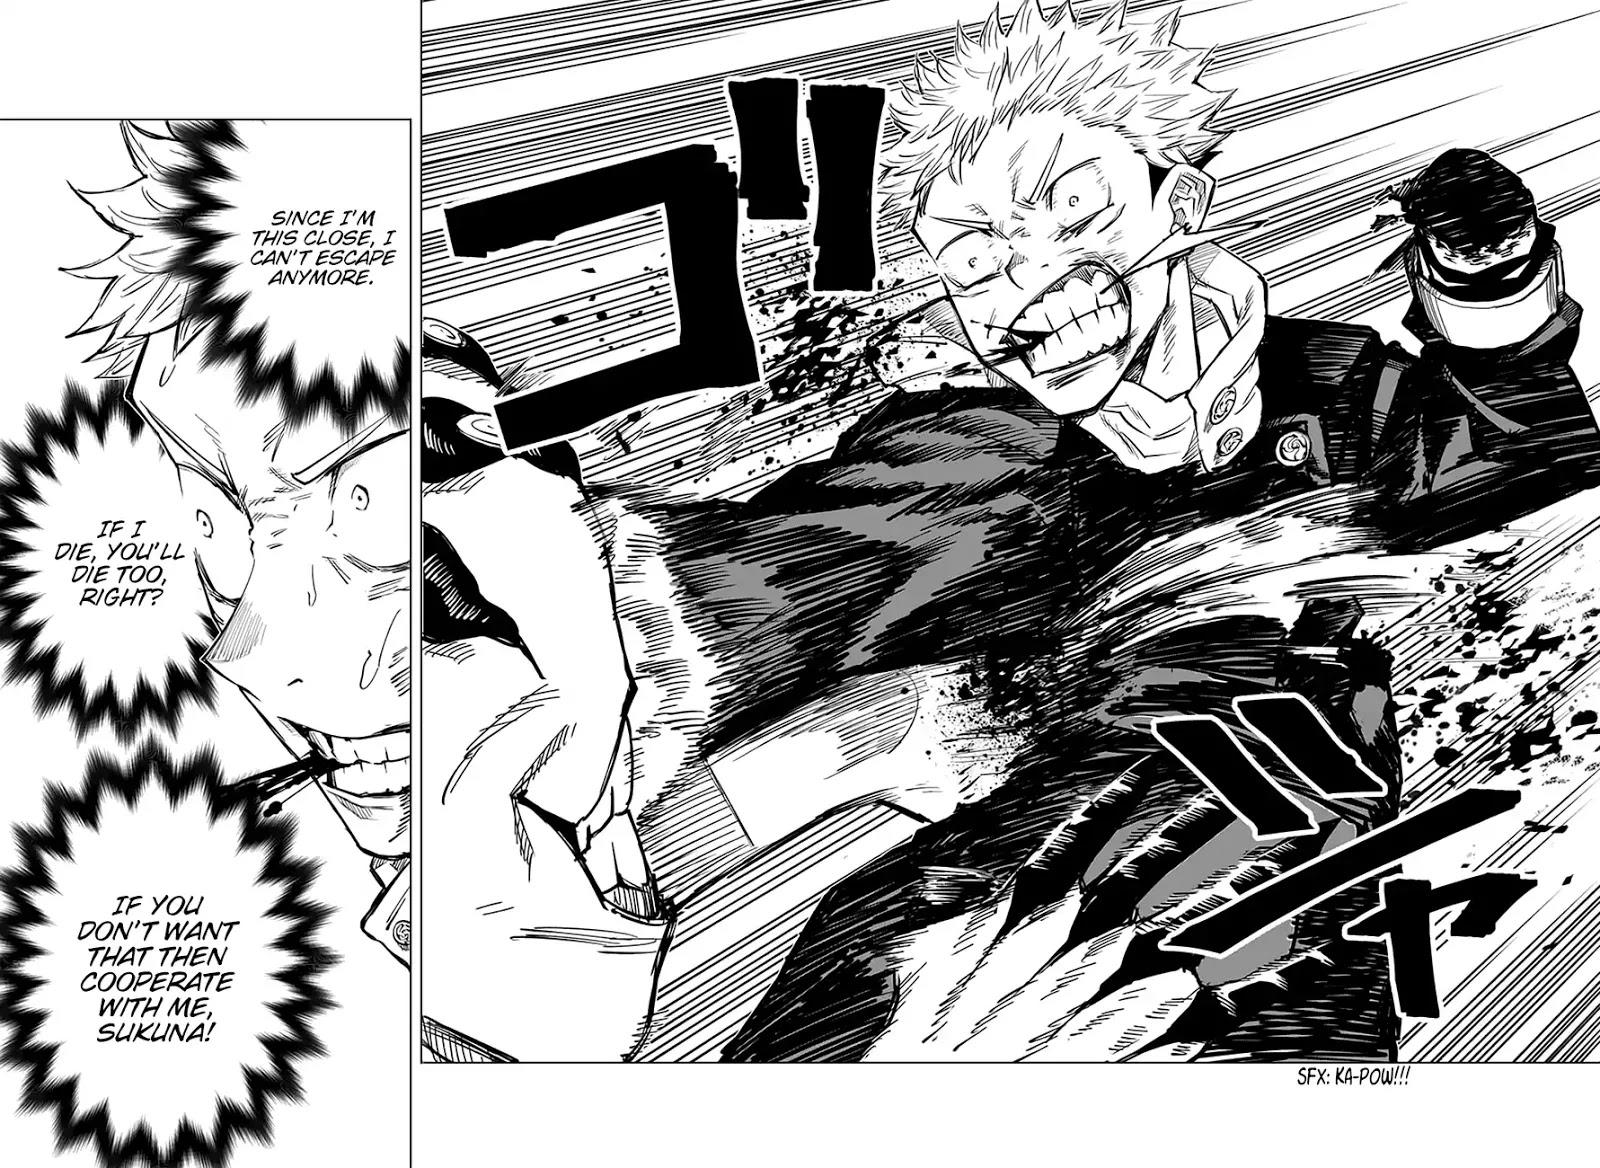 Jujutsu Kaisen Chapter 7: The Crused Womb's Earthly Existence (2) page 3 - Mangakakalot